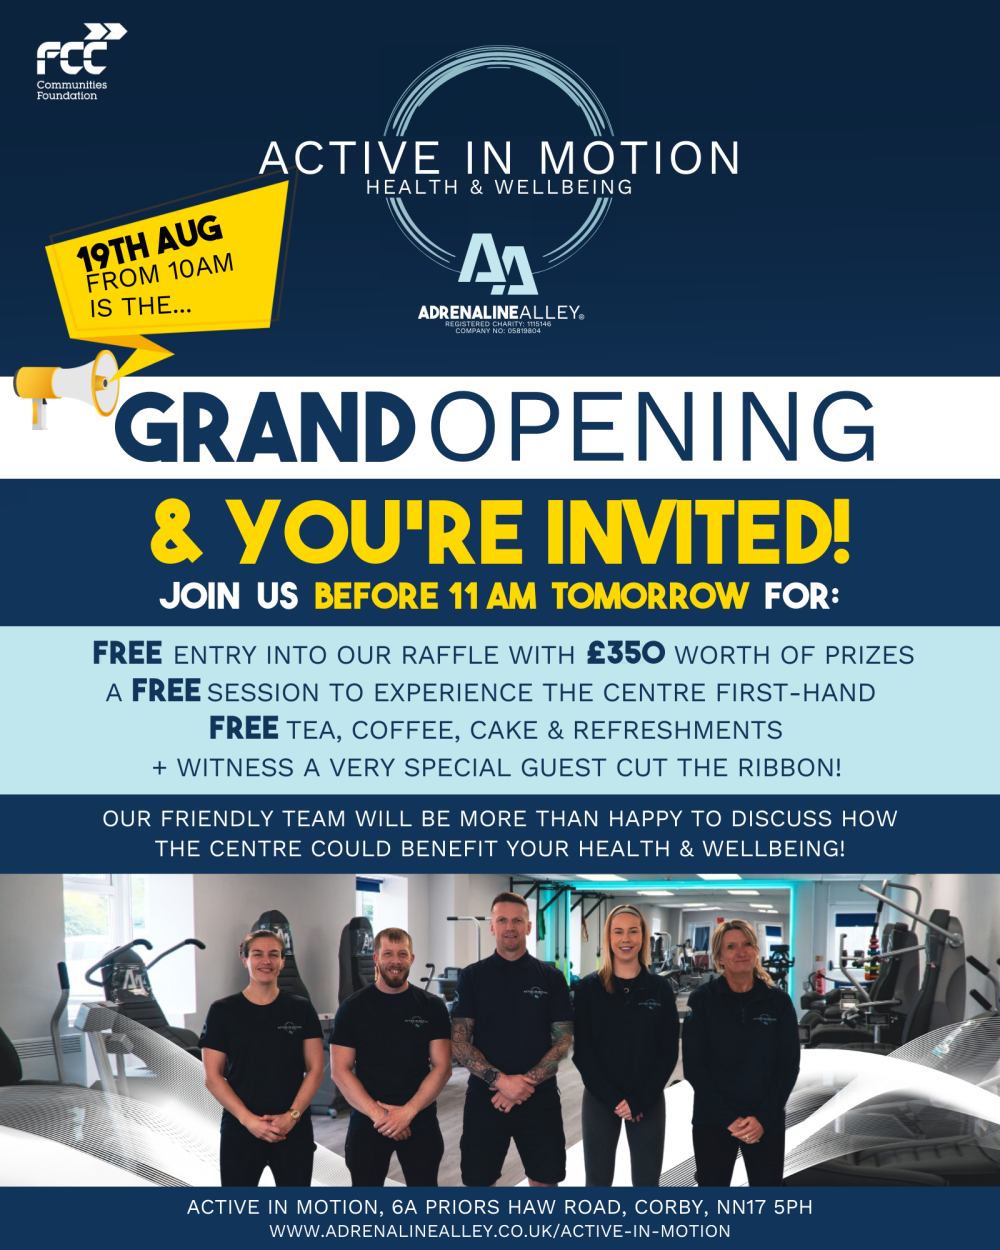 ACTIVE IN MOTION GRAND OPENING